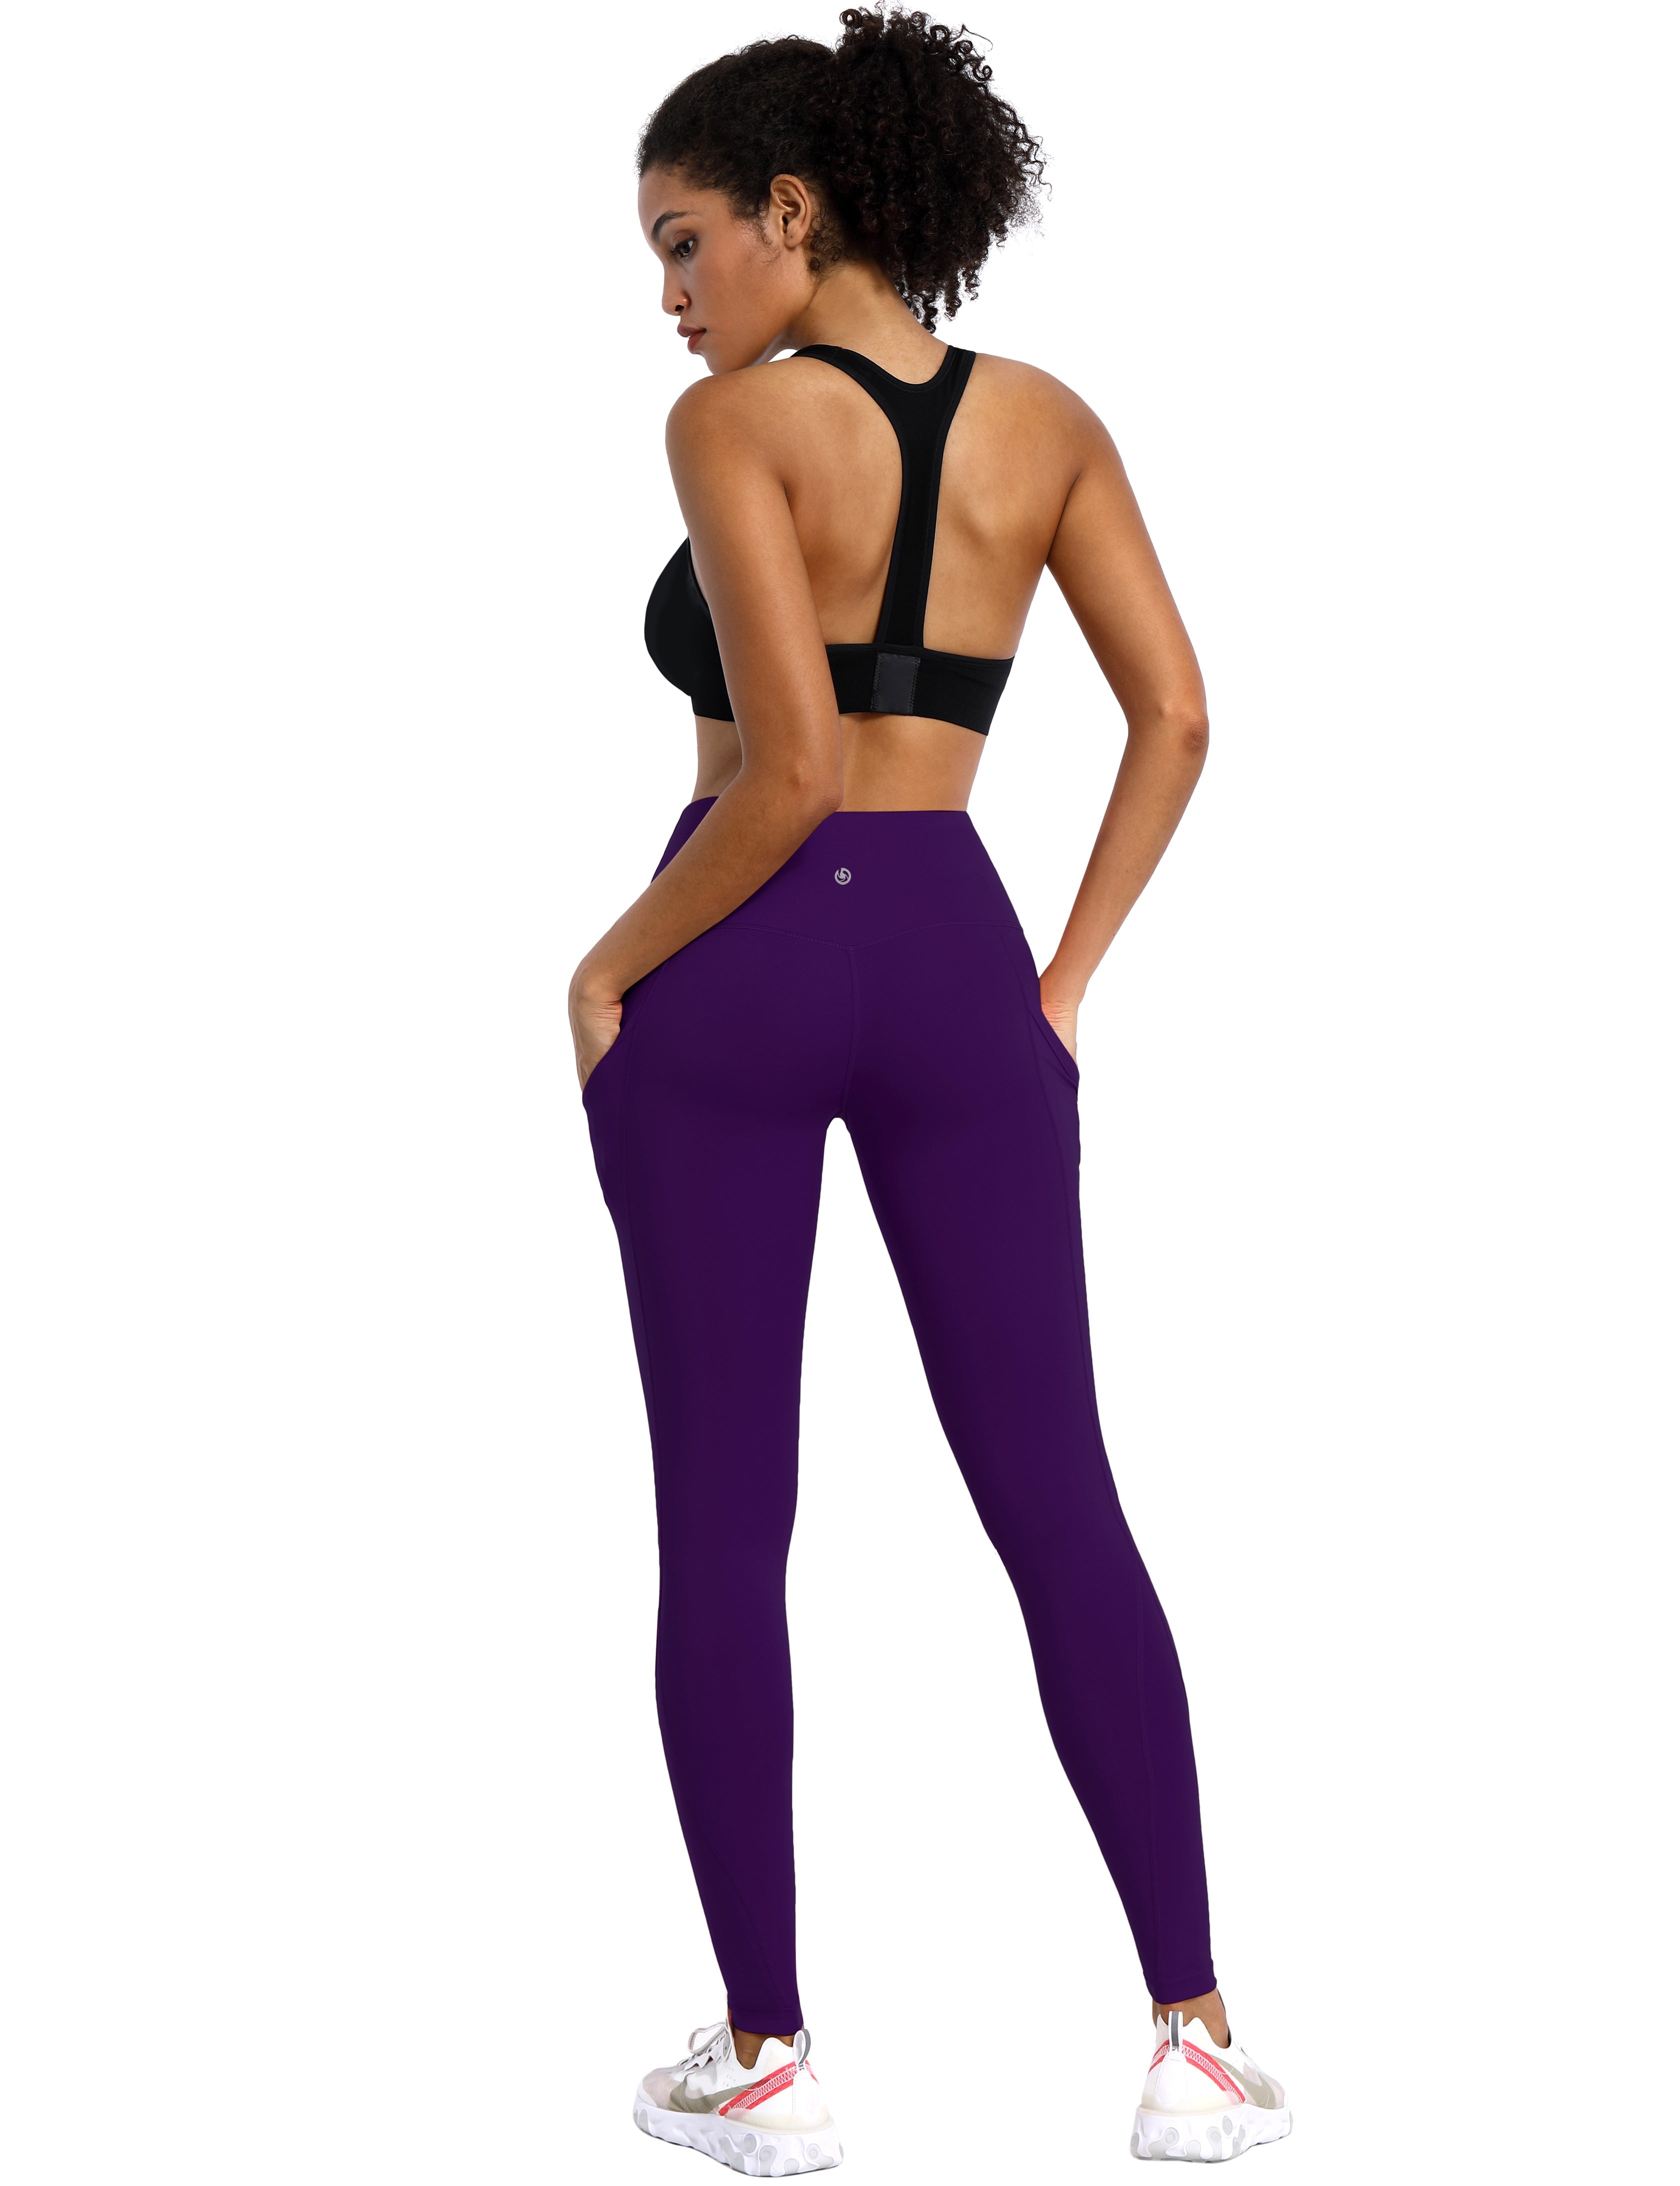 High Waist Side Pockets Golf Pants pansypurple 75% Nylon, 25% Spandex Fabric doesn't attract lint easily 4-way stretch No see-through Moisture-wicking Tummy control Inner pocket